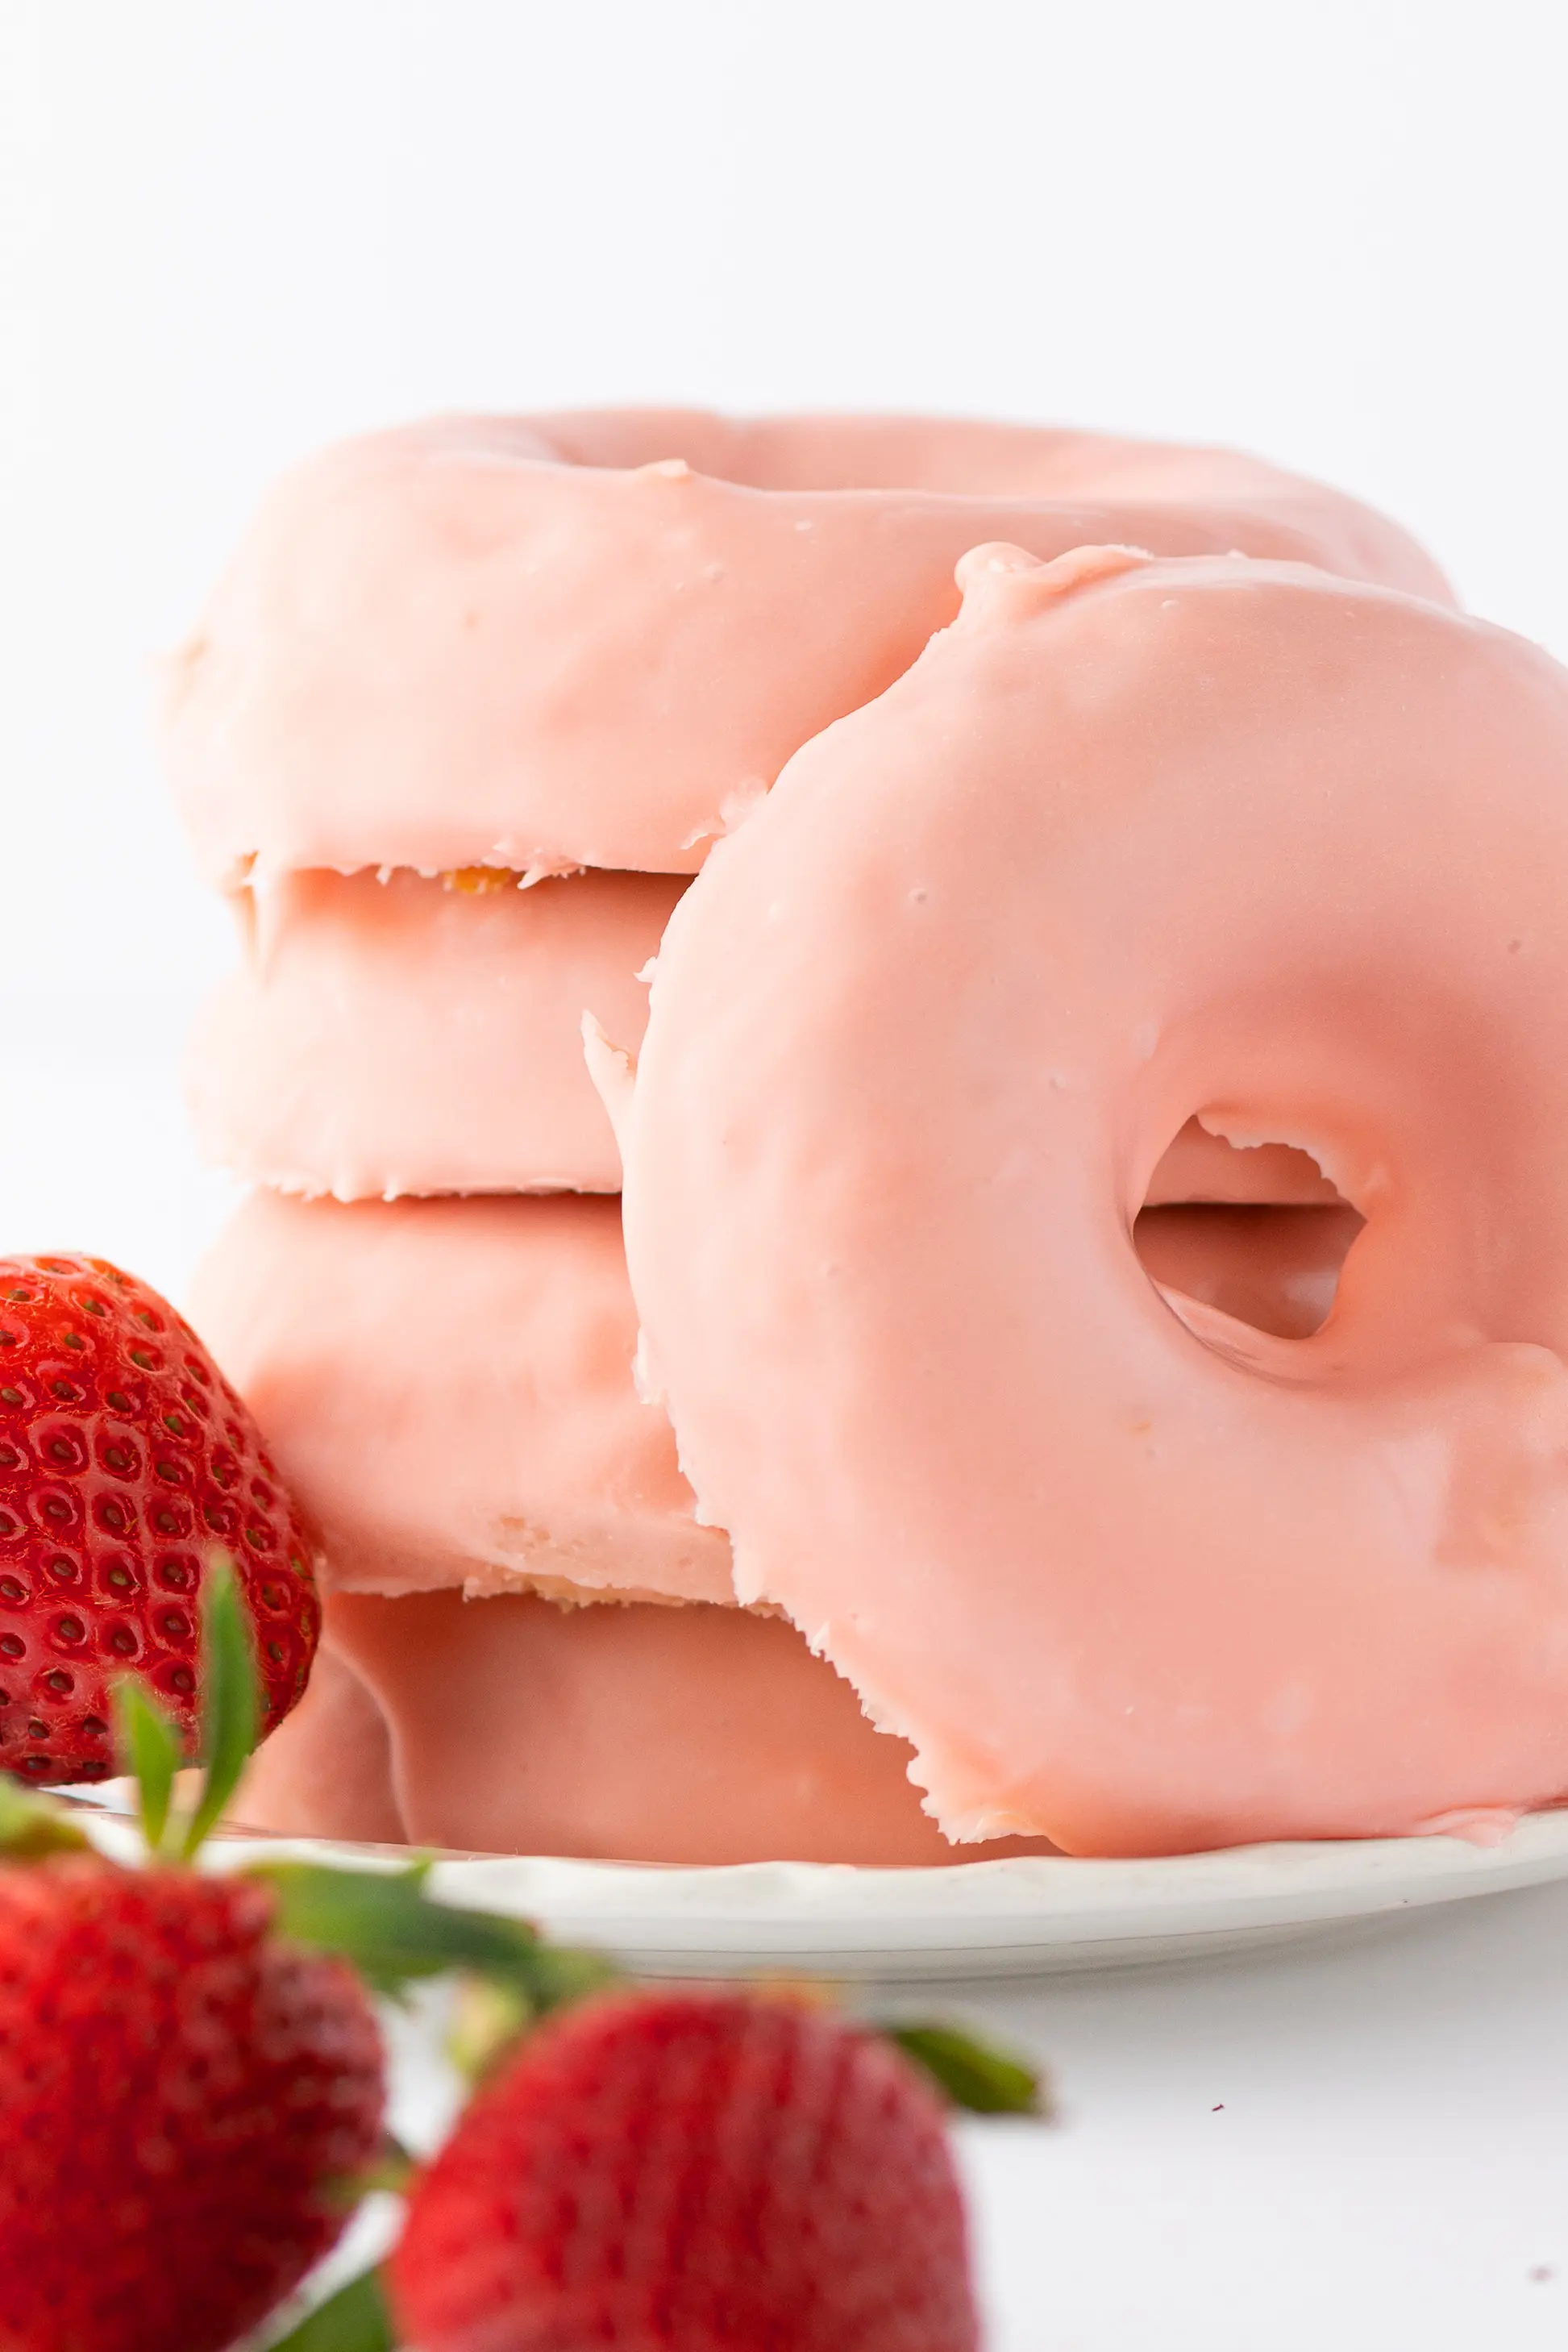 A stack of strawberry glazed donuts on a white plate with fresh ripe red berries scattered around the tabletop.